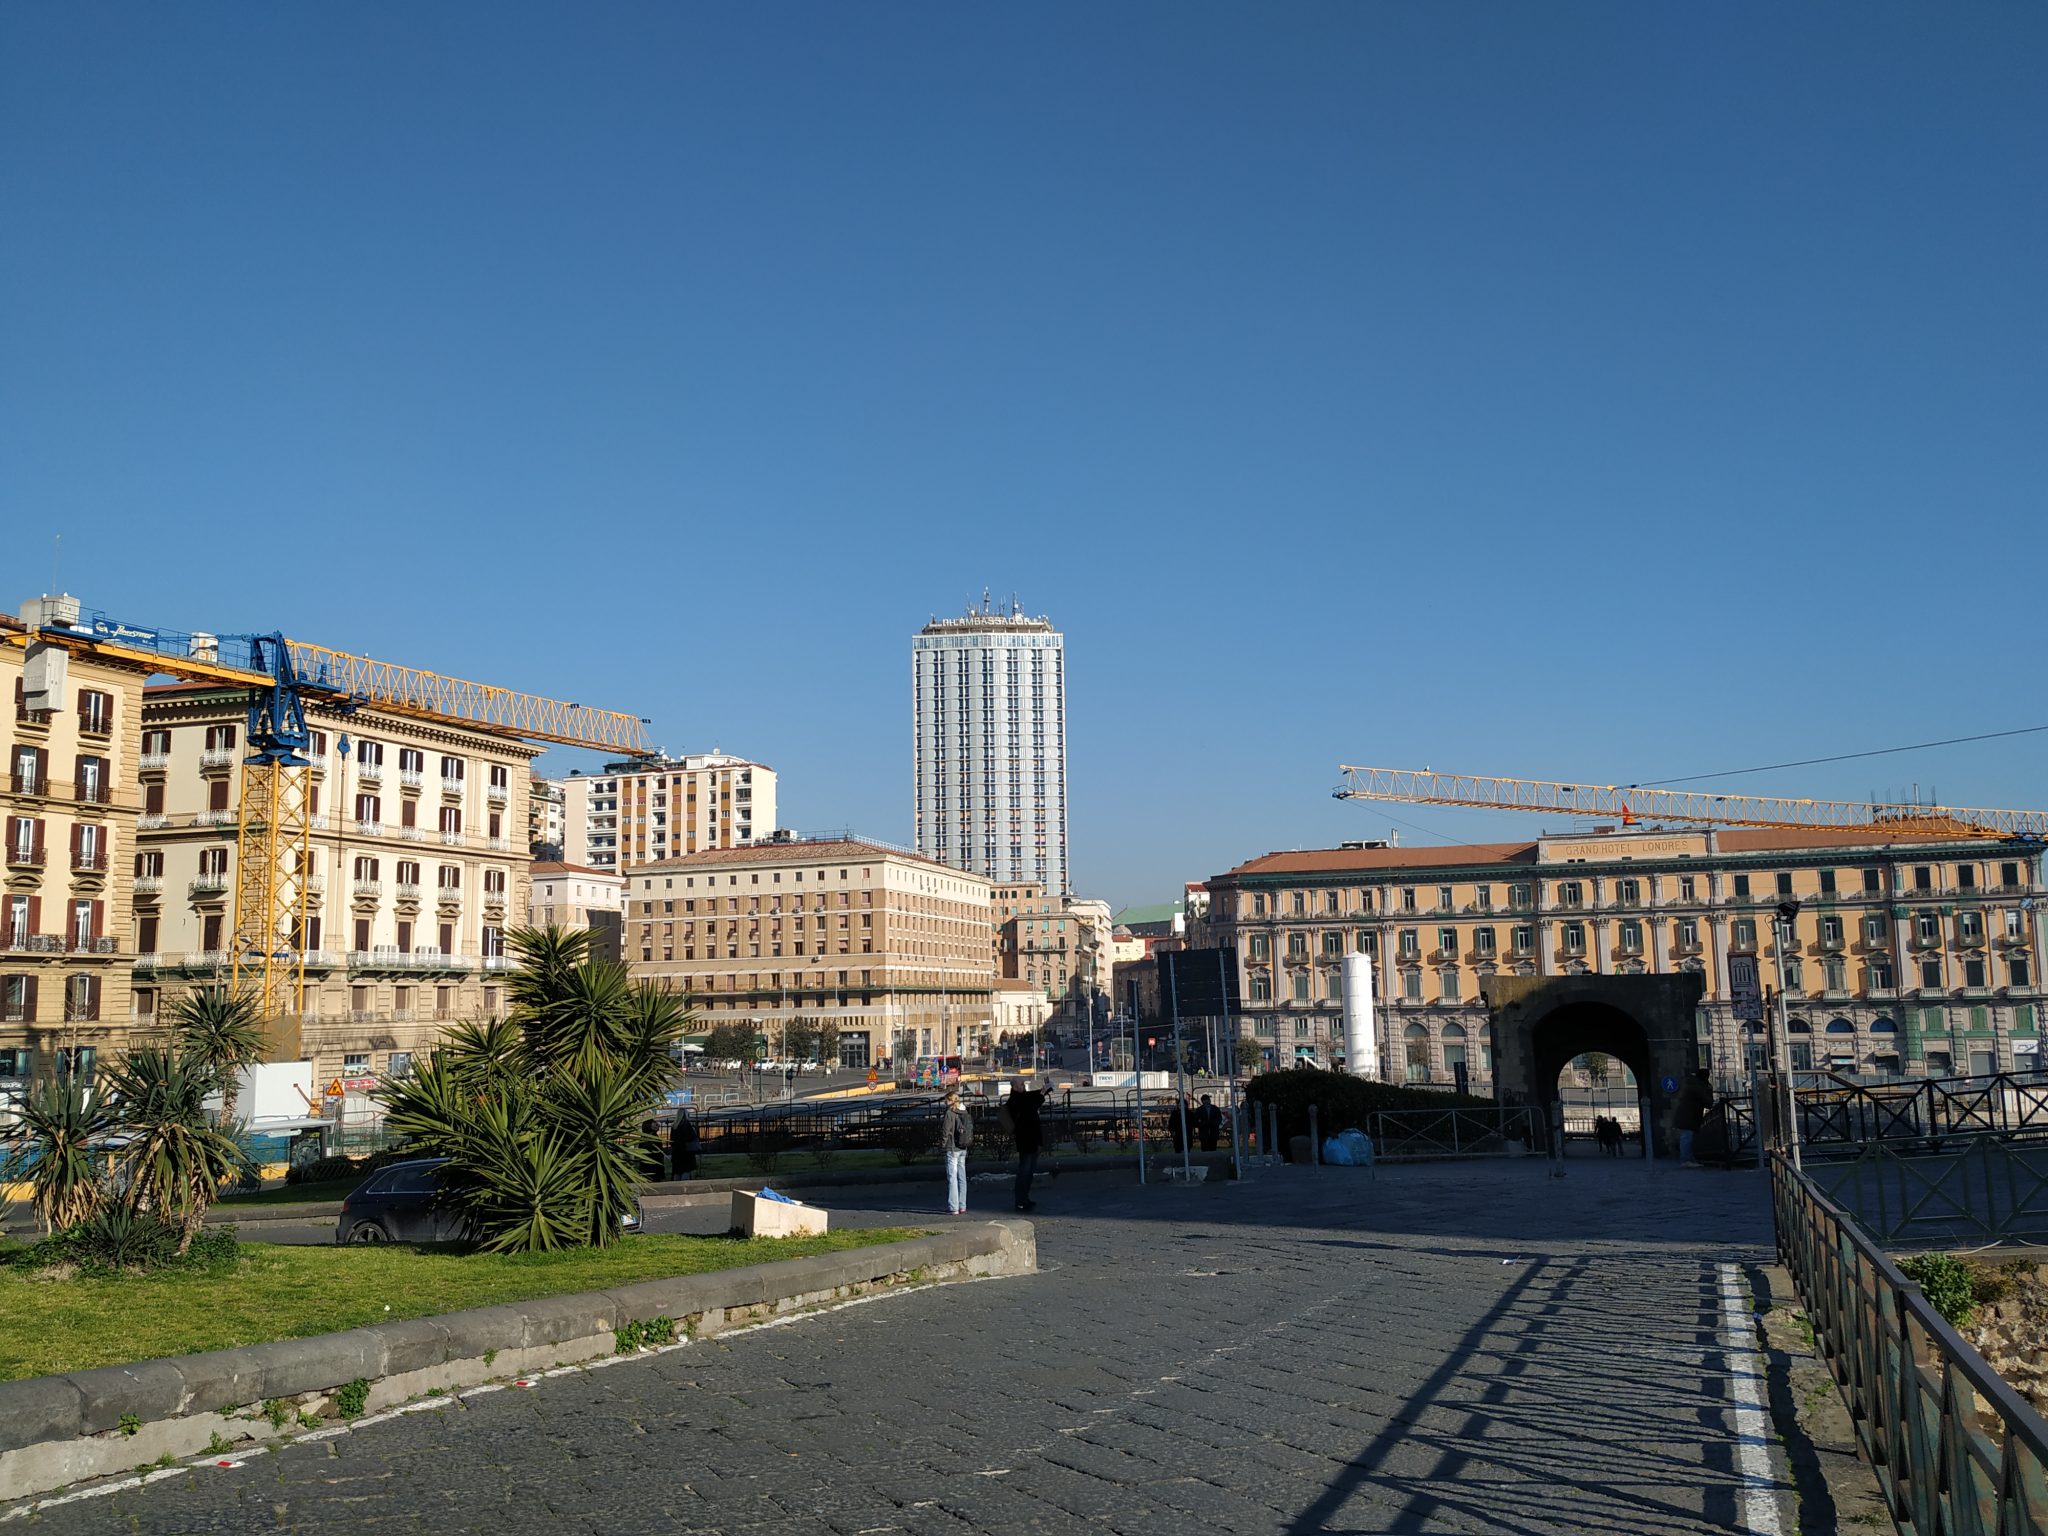 The square in front of the Maschio Angioino, Naples